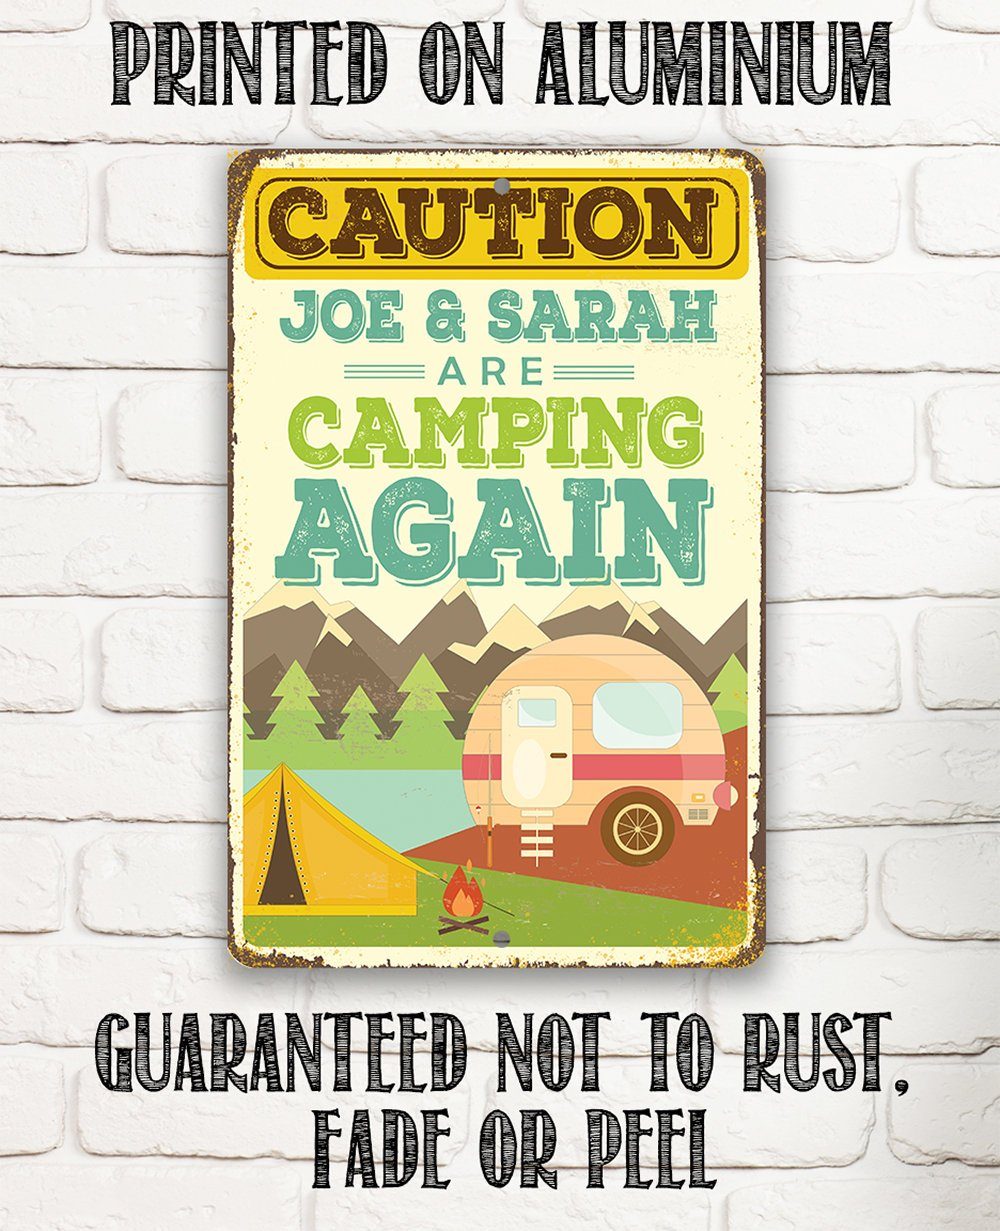 Personalized - Caution We Are Camping Again - Metal Sign | Lone Star Art.